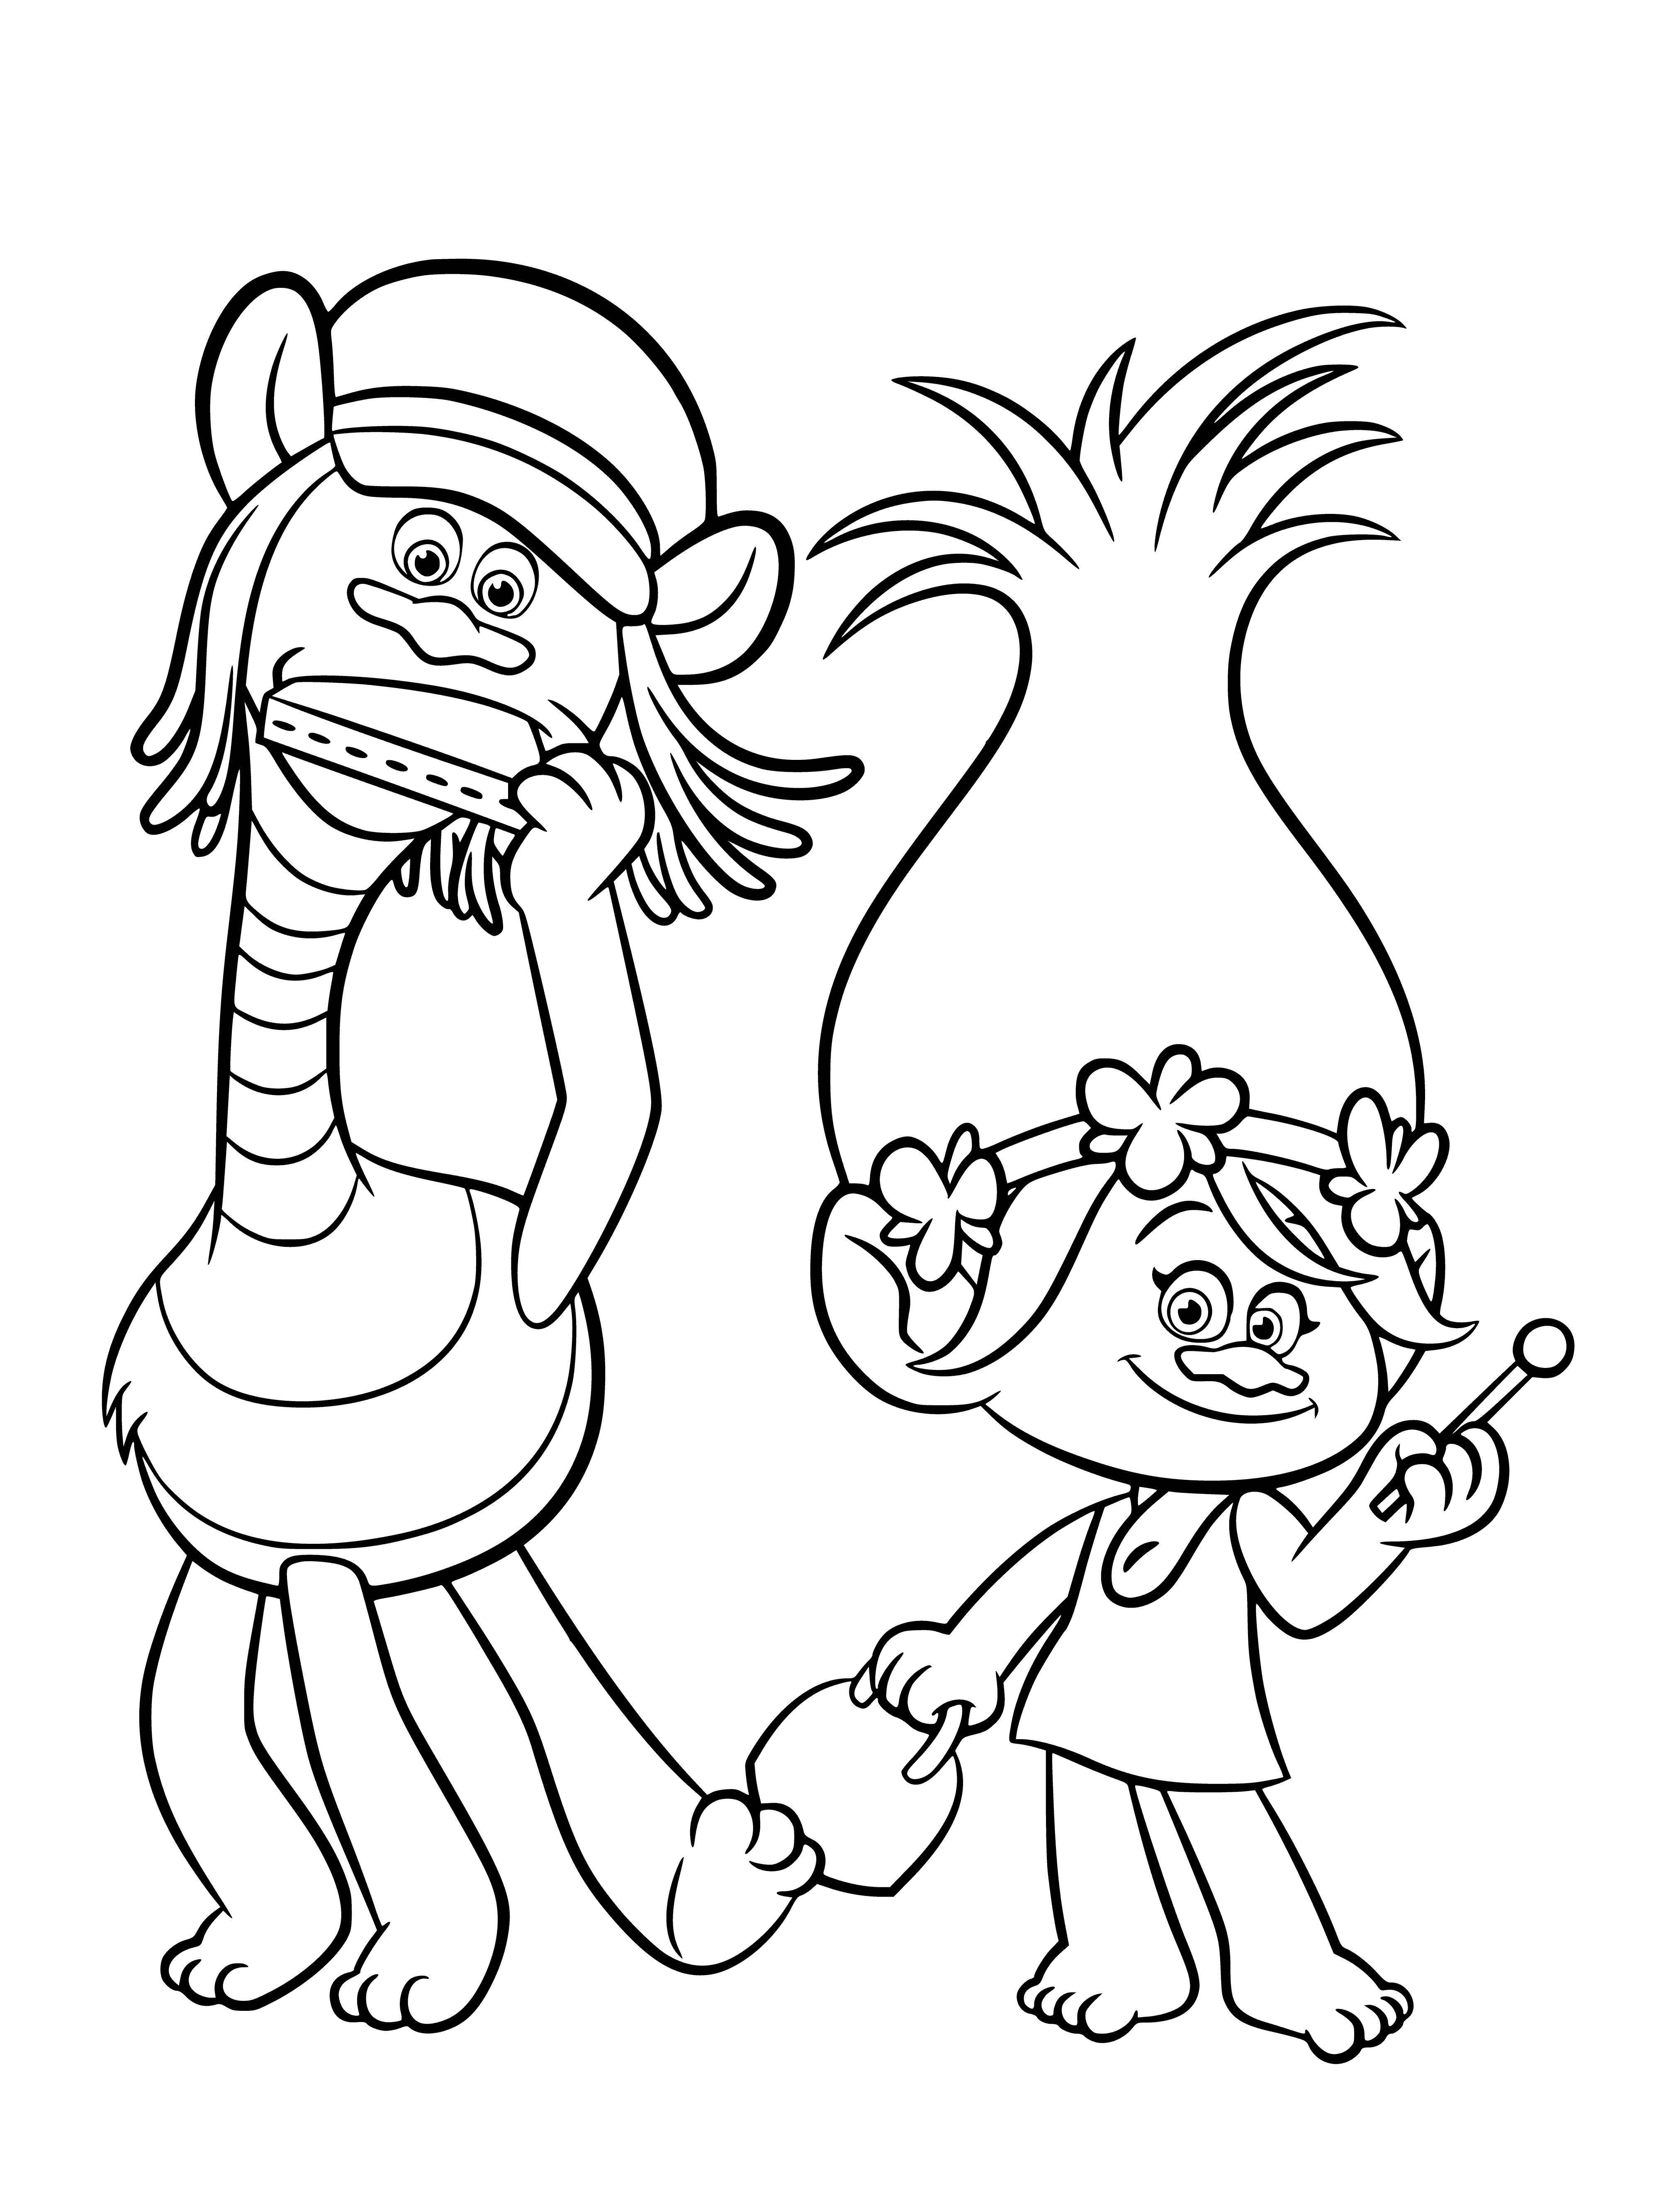 Trolls Cooper and Rose coloring page